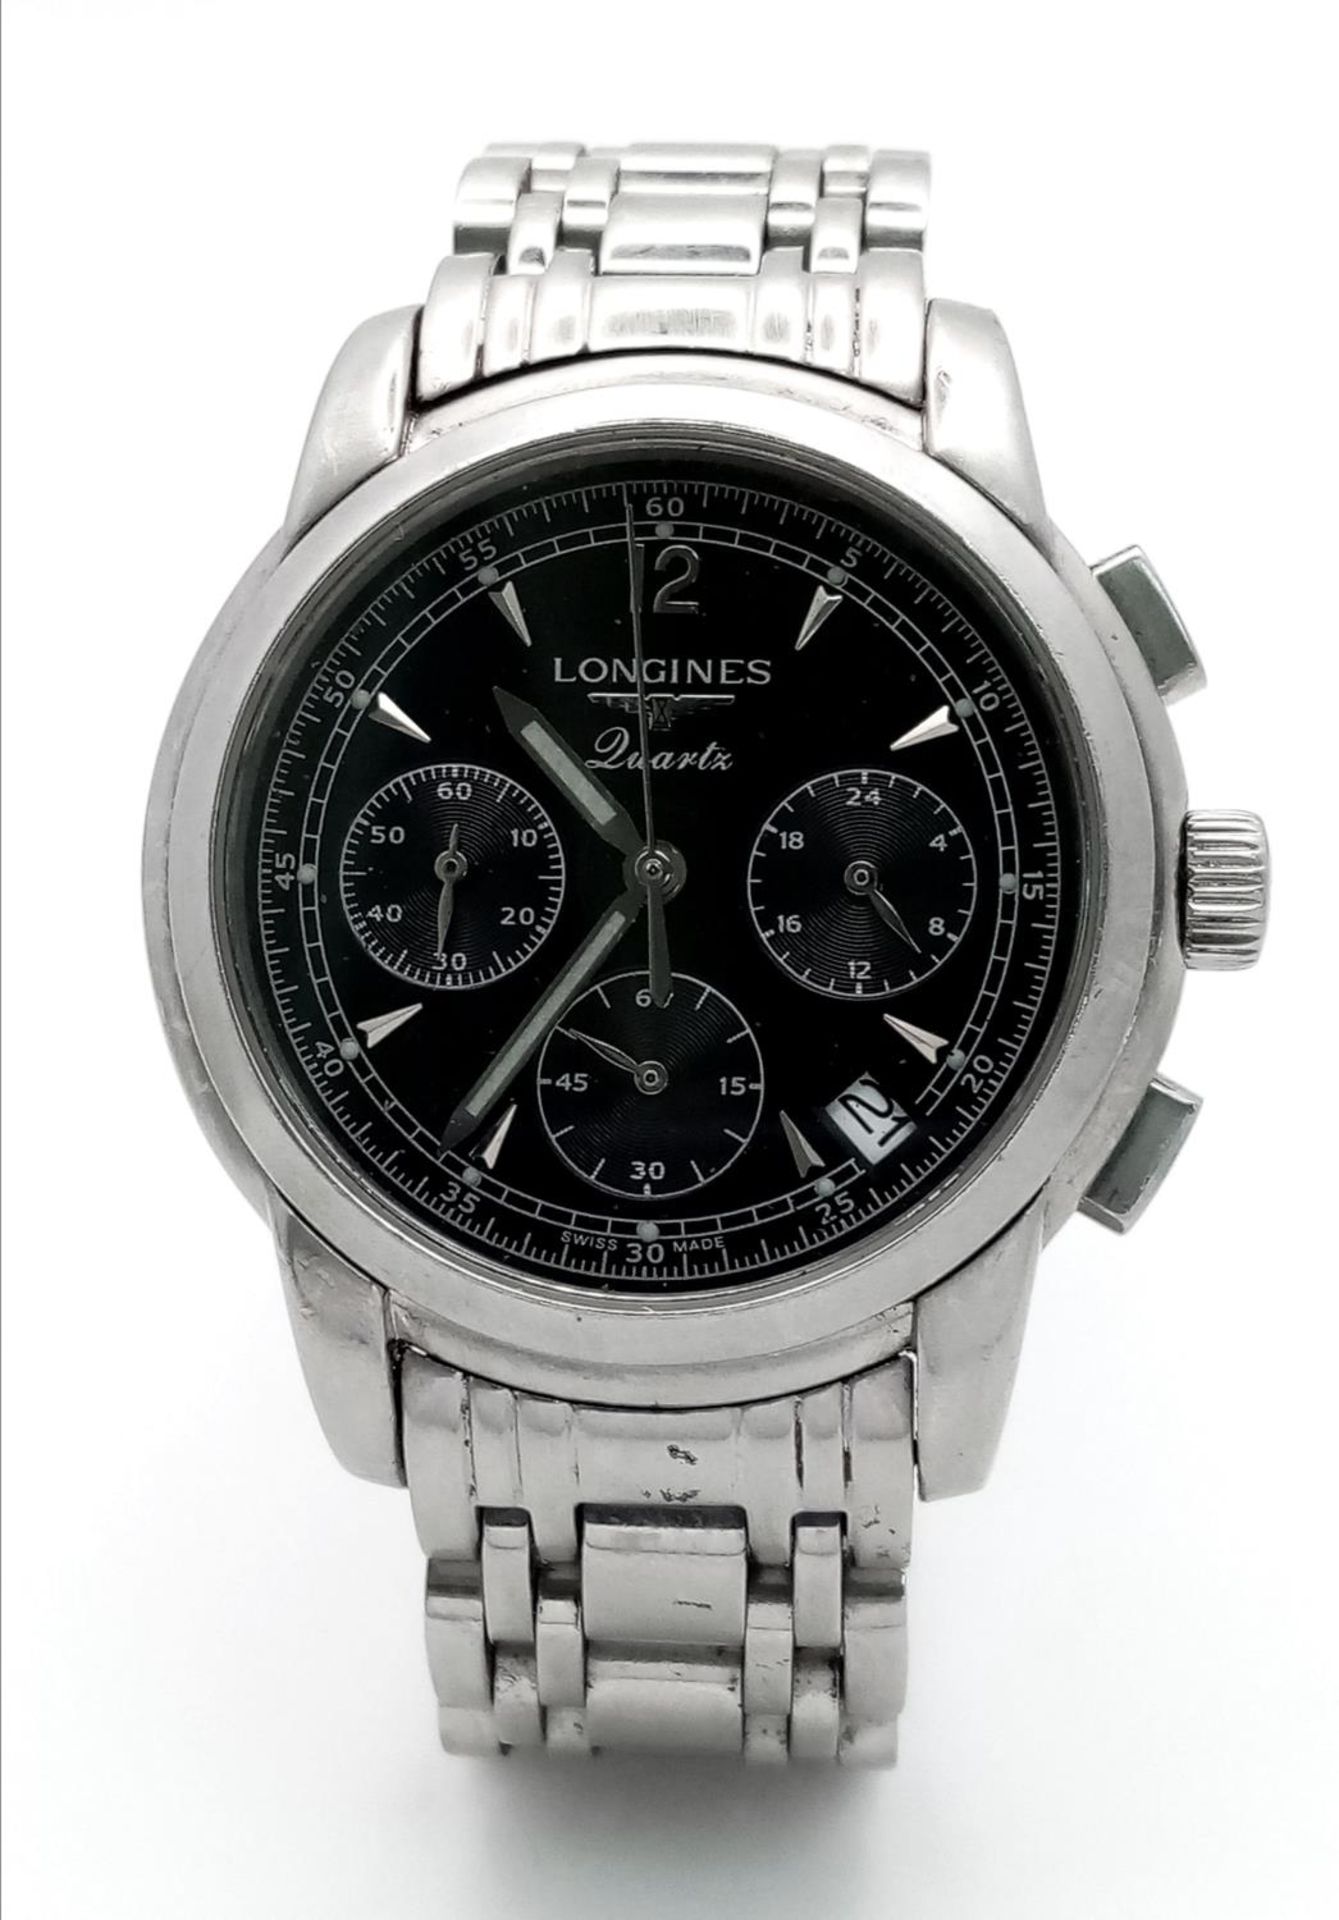 A Longine Quartz Chronograph Gents Watch. Stainless steel bracelet and case - 39mm. Black dial - Image 2 of 9